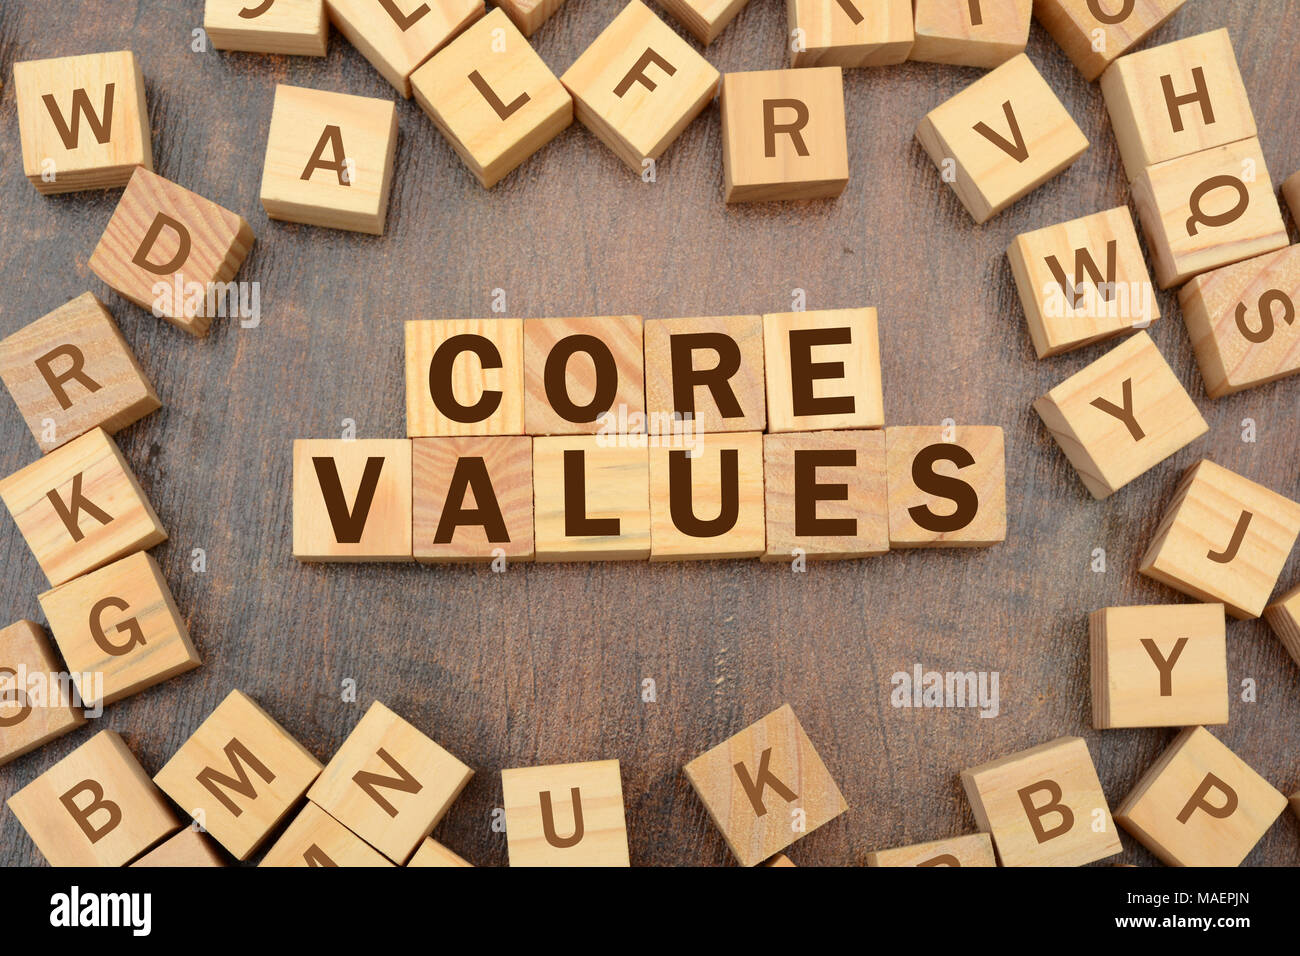 Core Values word with wooden blocks scattered around. Stock Photo